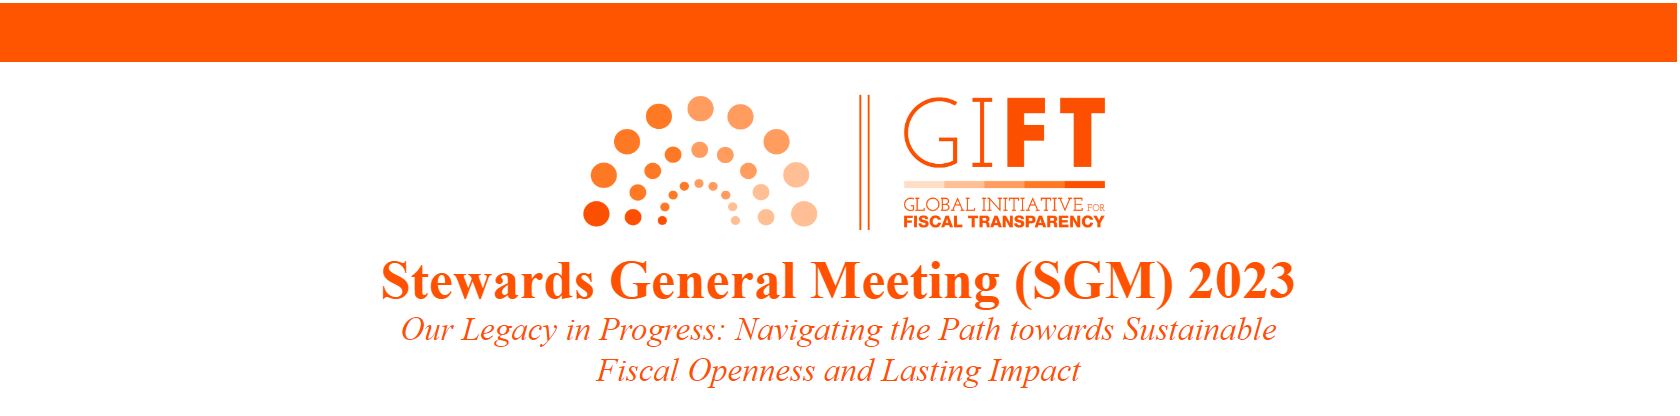 GIFT Stewards General Meeting (SGM) 2023